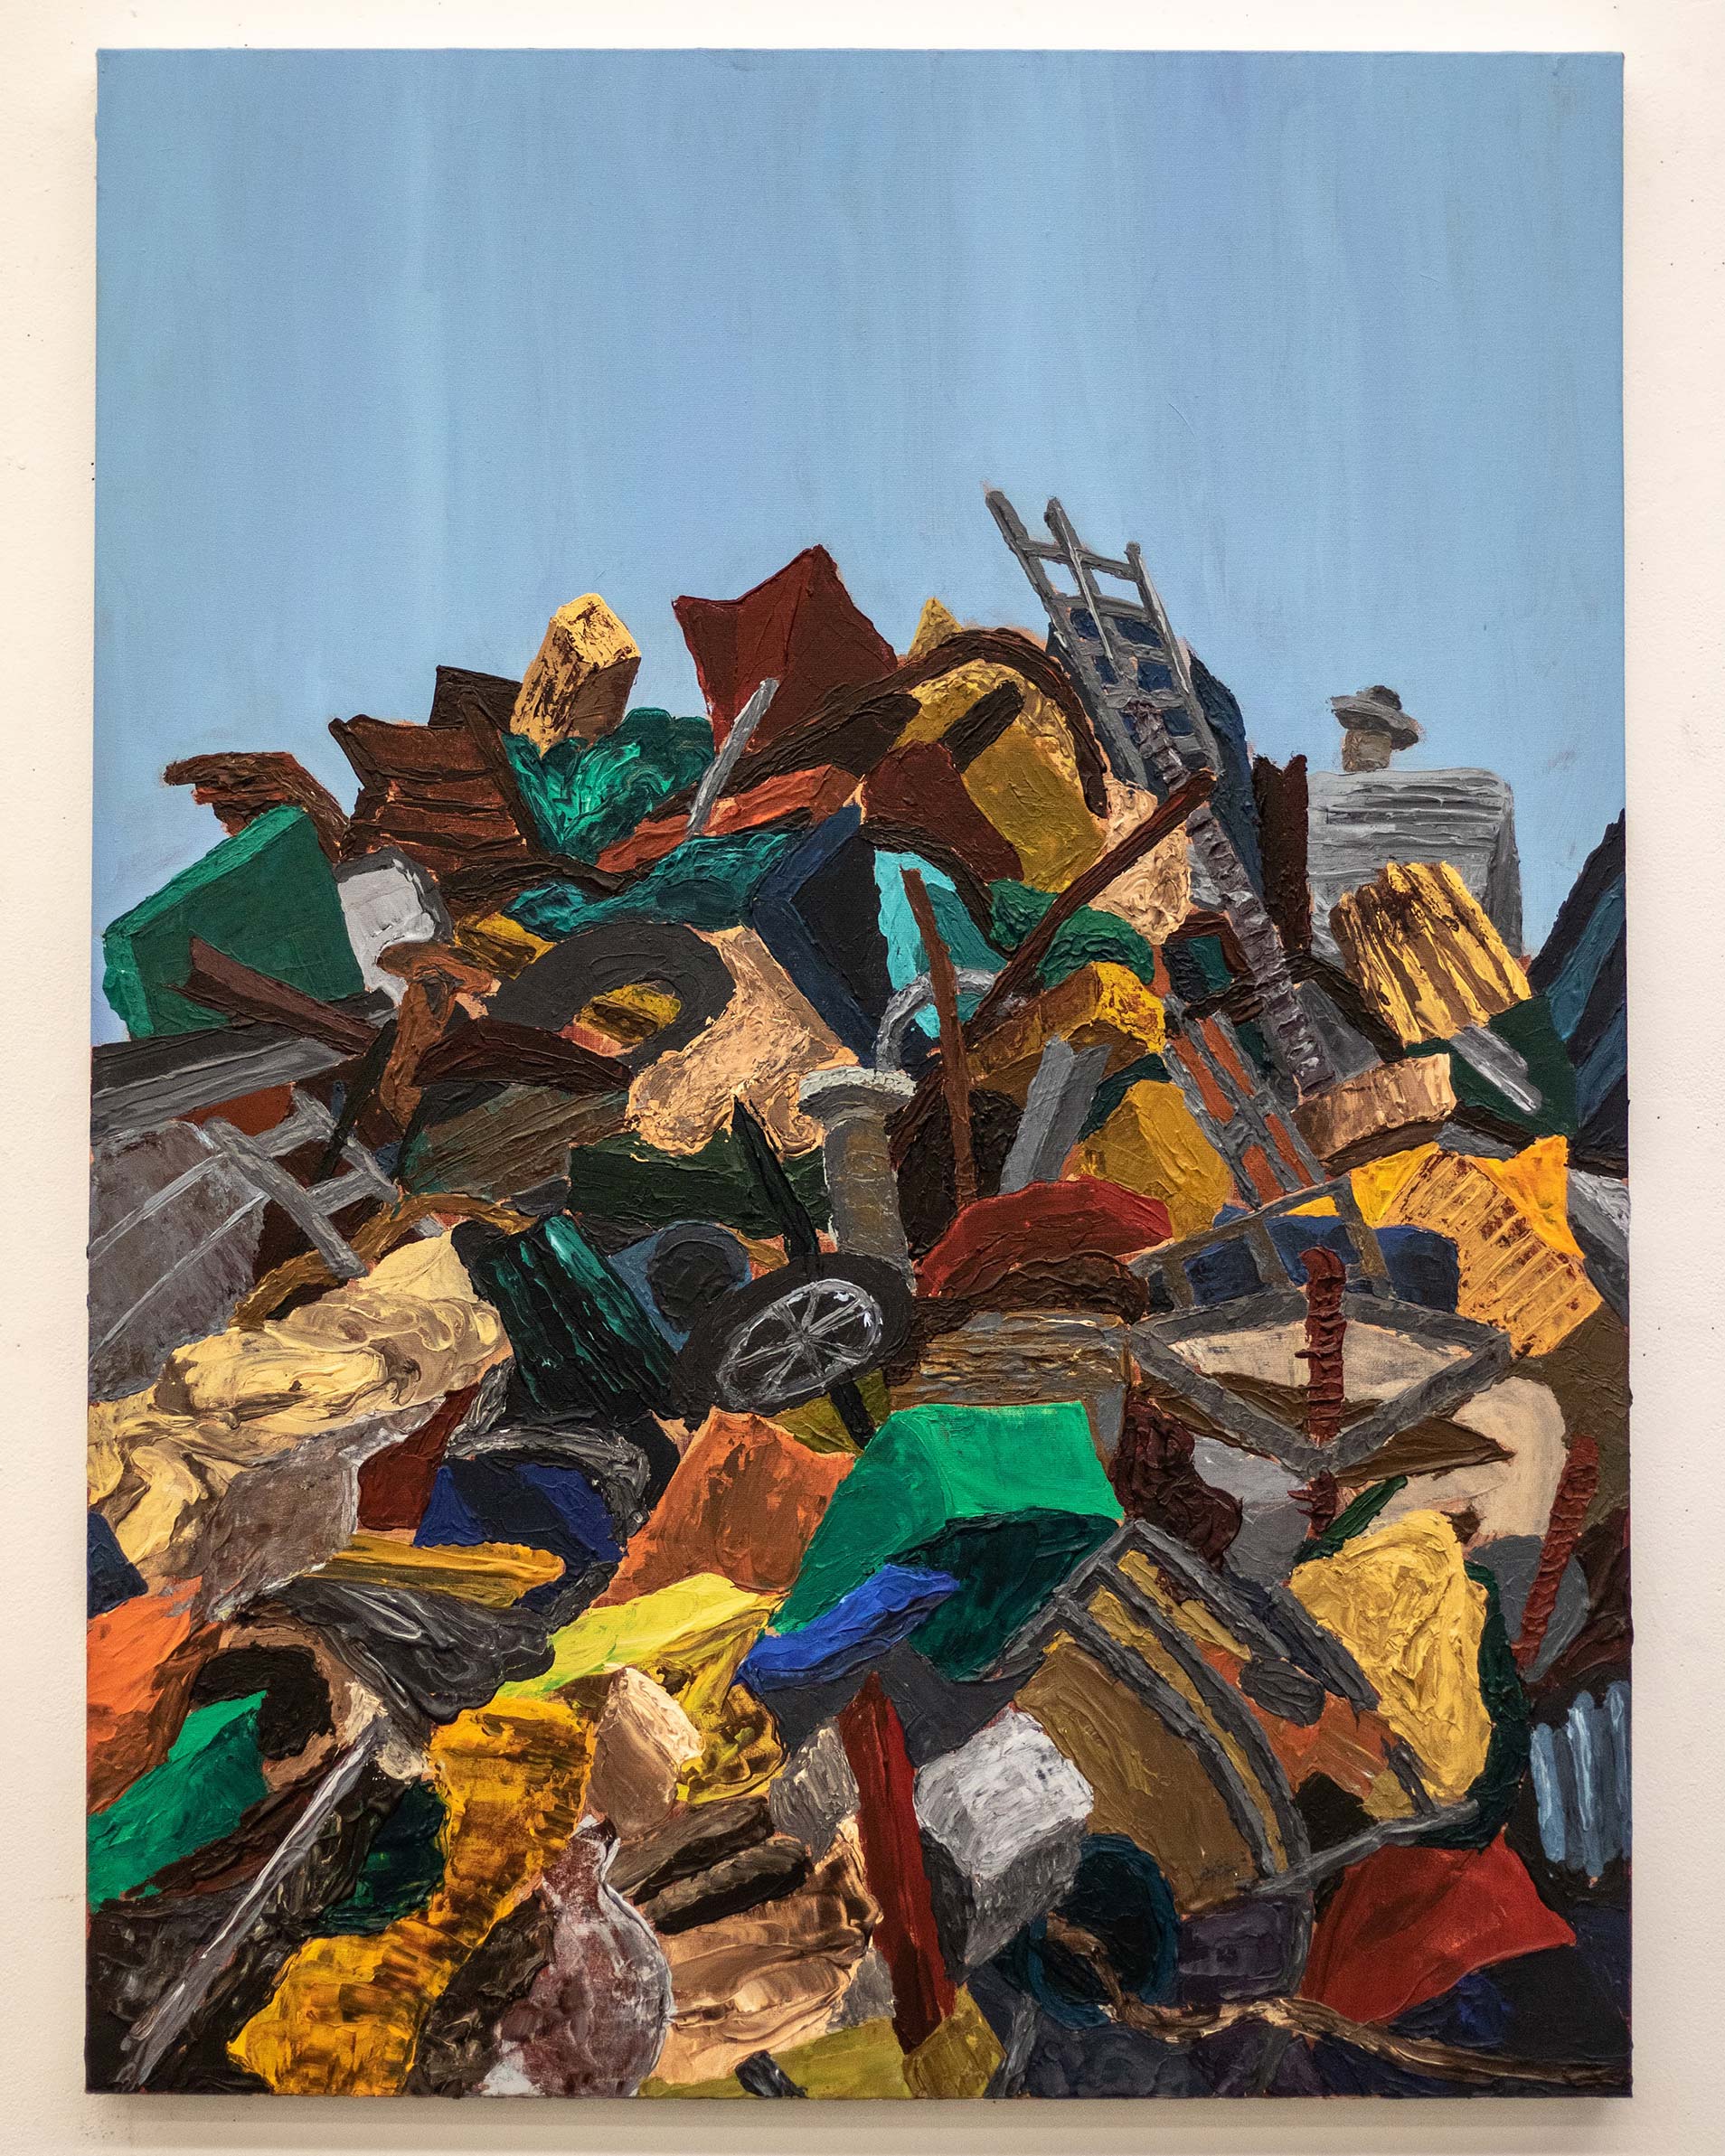 Painting of a pile of garbage below a blue sky.